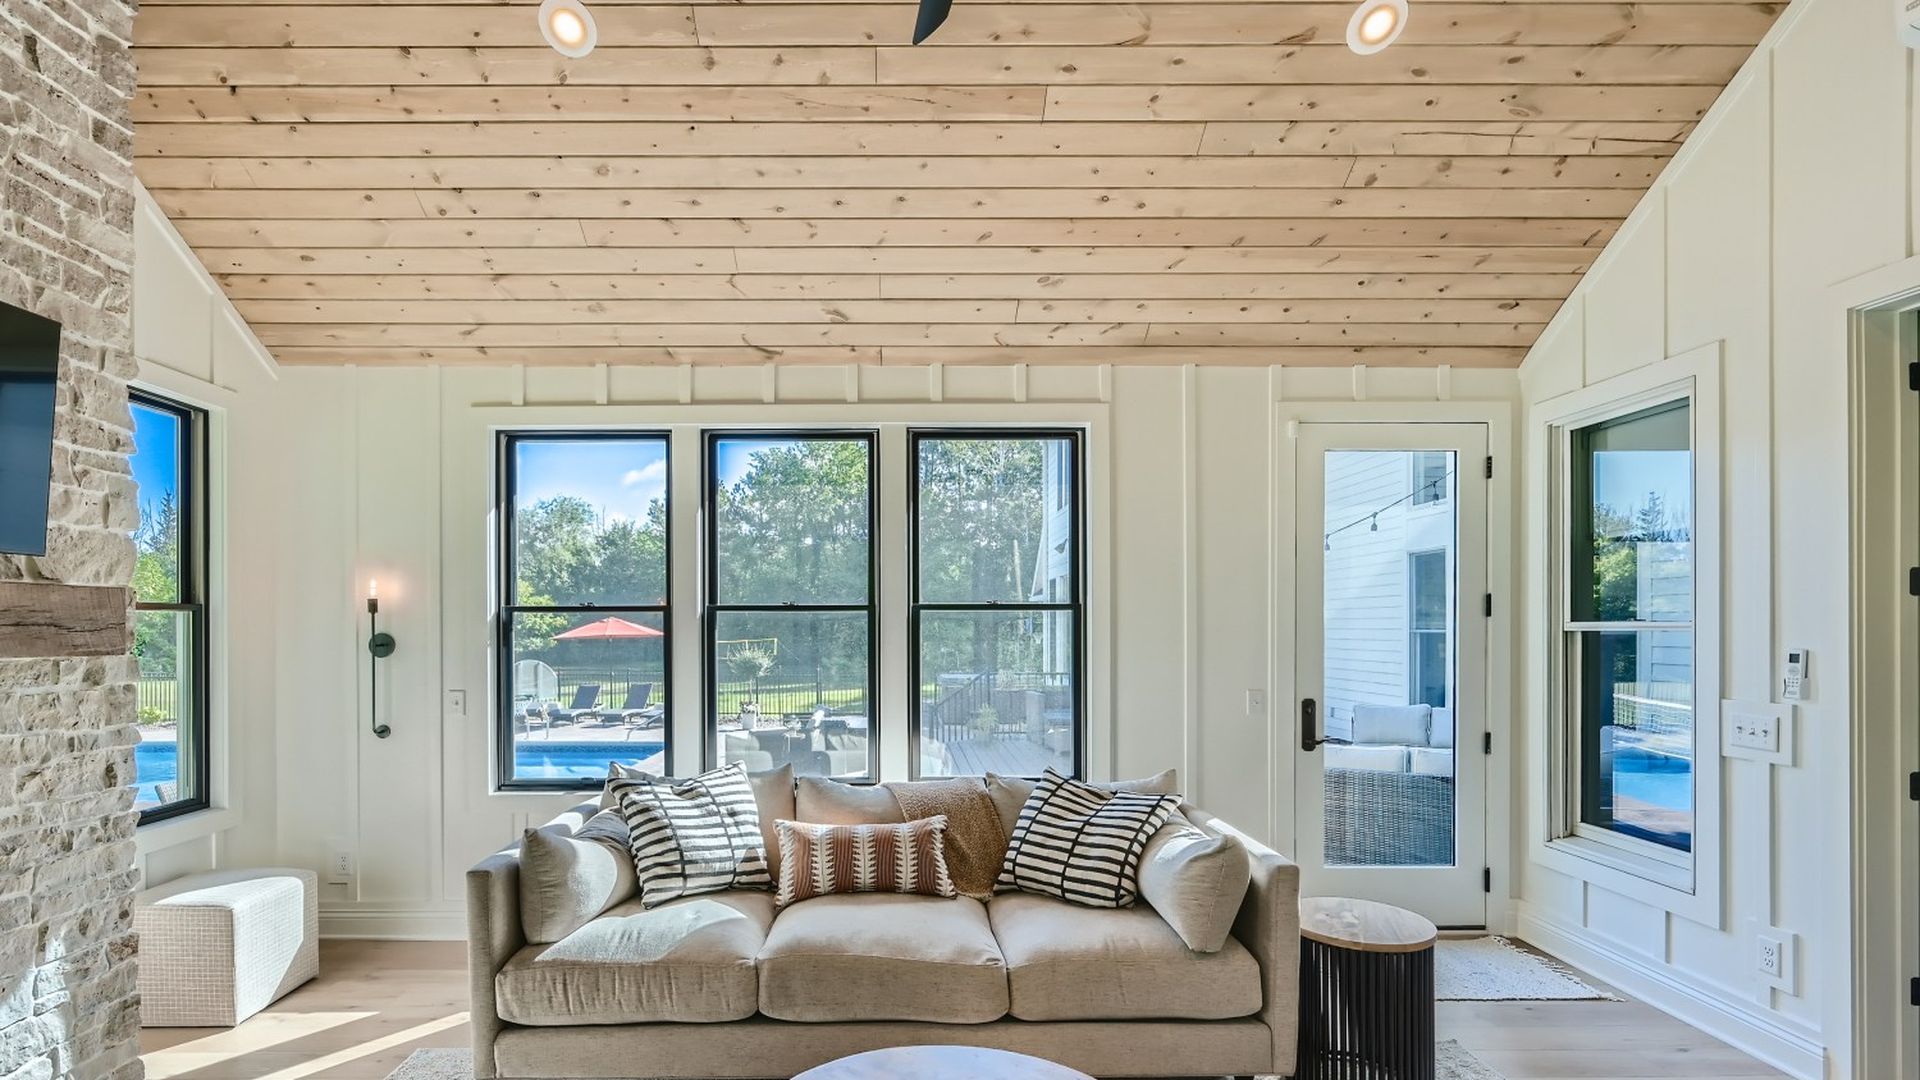 A photo showing a family room with a couch, wooden ceiling and vertical, shiplap-like walls with black window casings